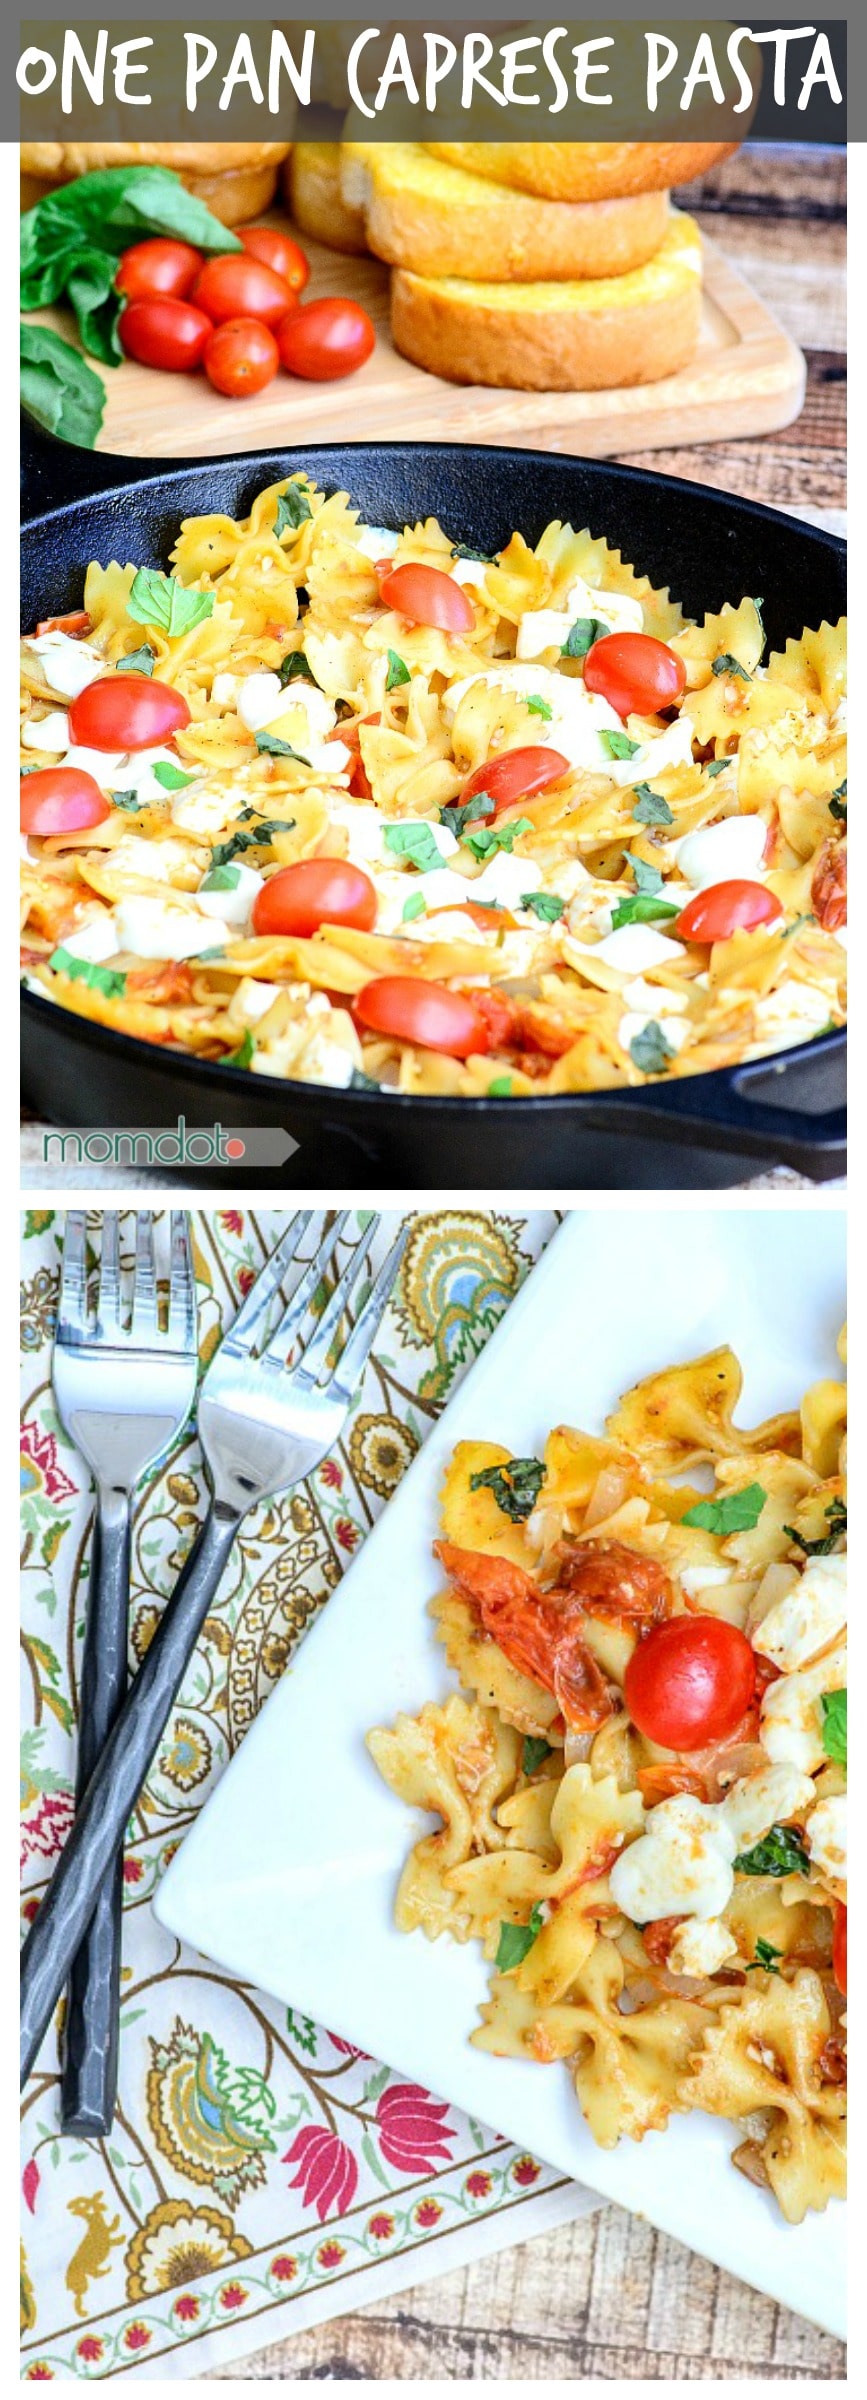 One Pan Caprese pasta (No Draining!) , enjoy delicious fresh basil, mozzerella, and tomatoes in this meal that is perfect for dinner or lunch and provides incredible left overs